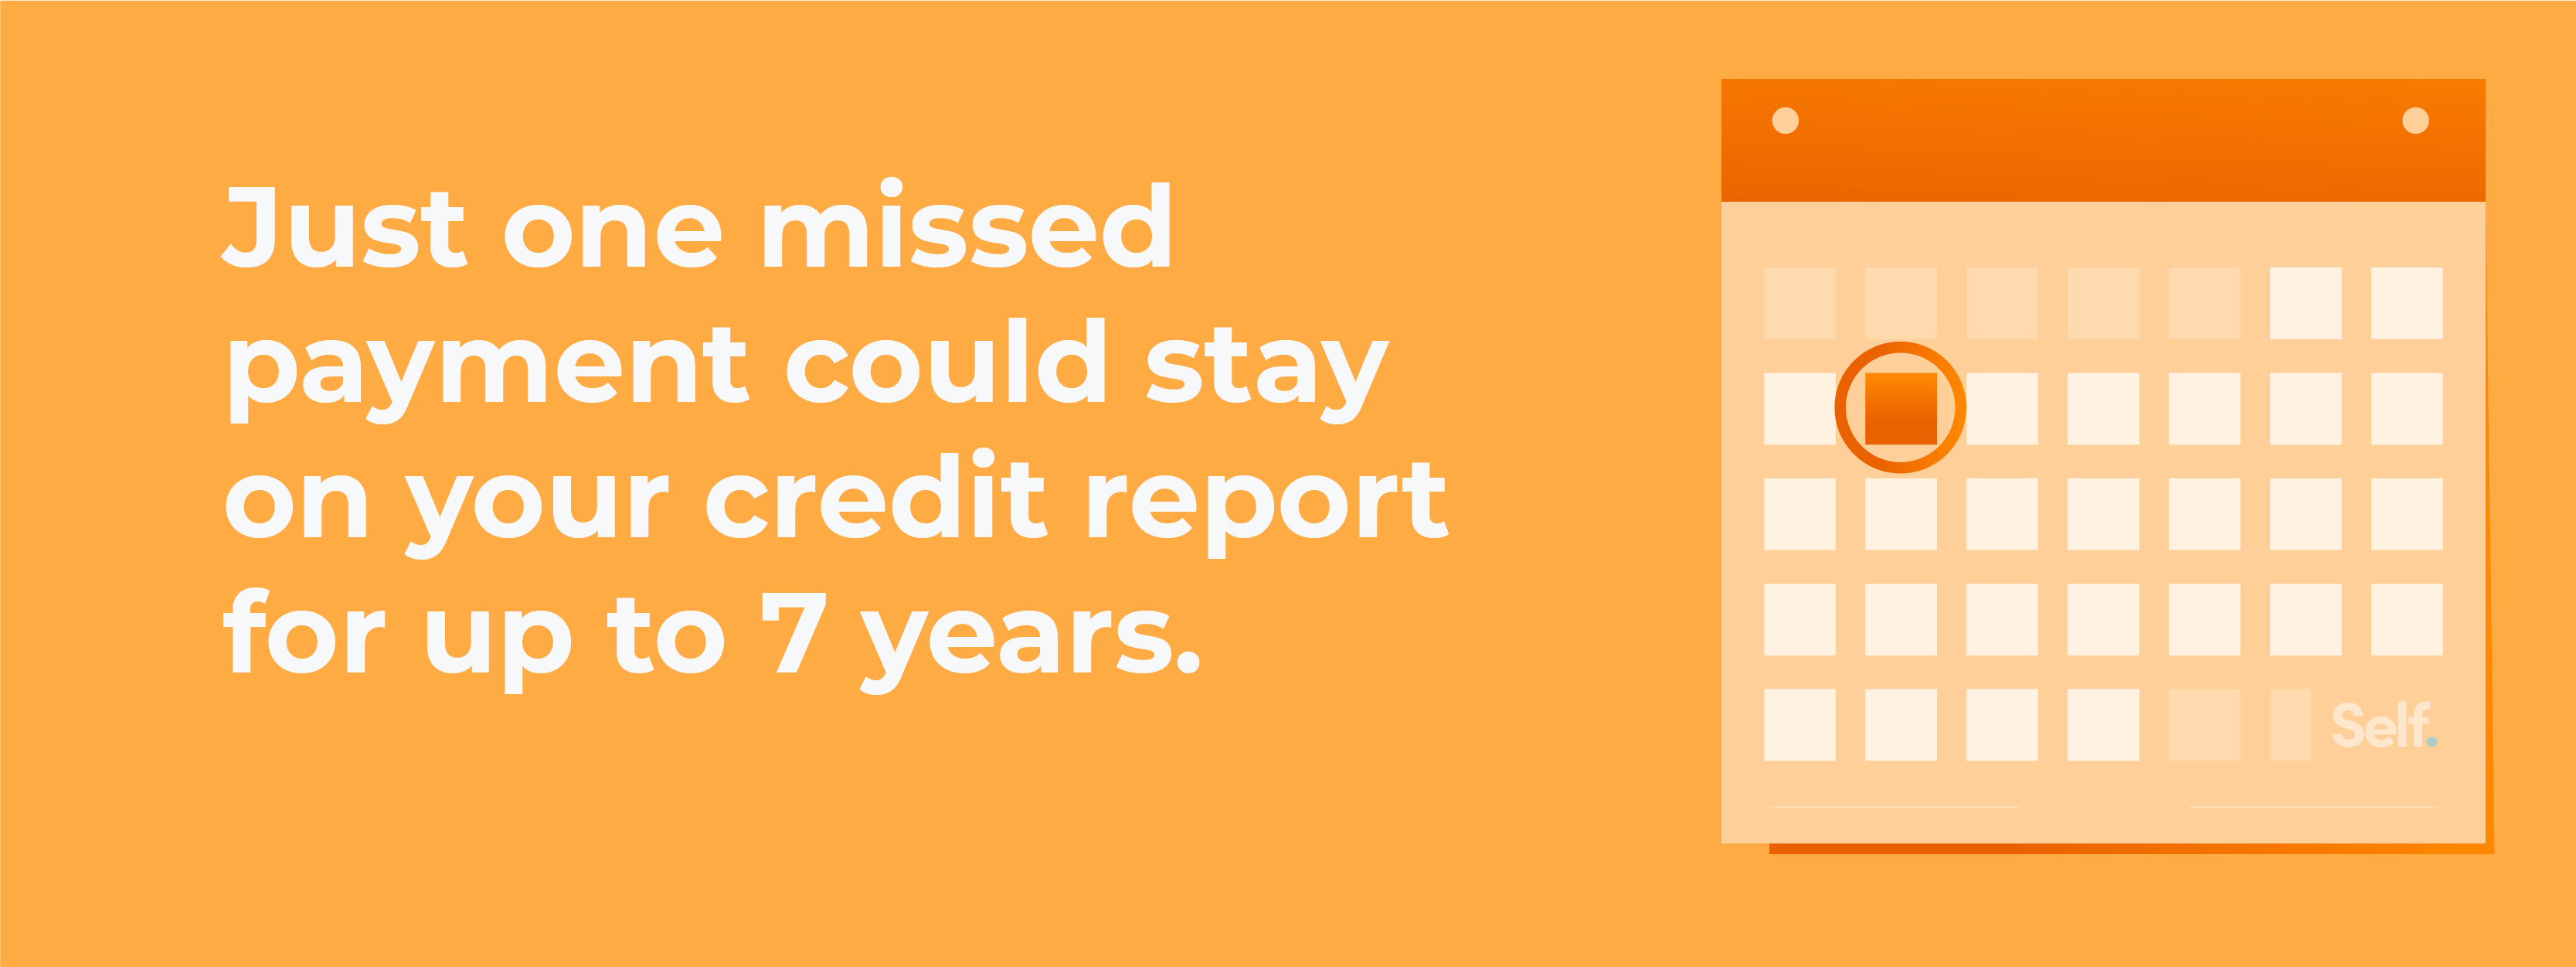 One missed payment can stay on your credit report for 7 years